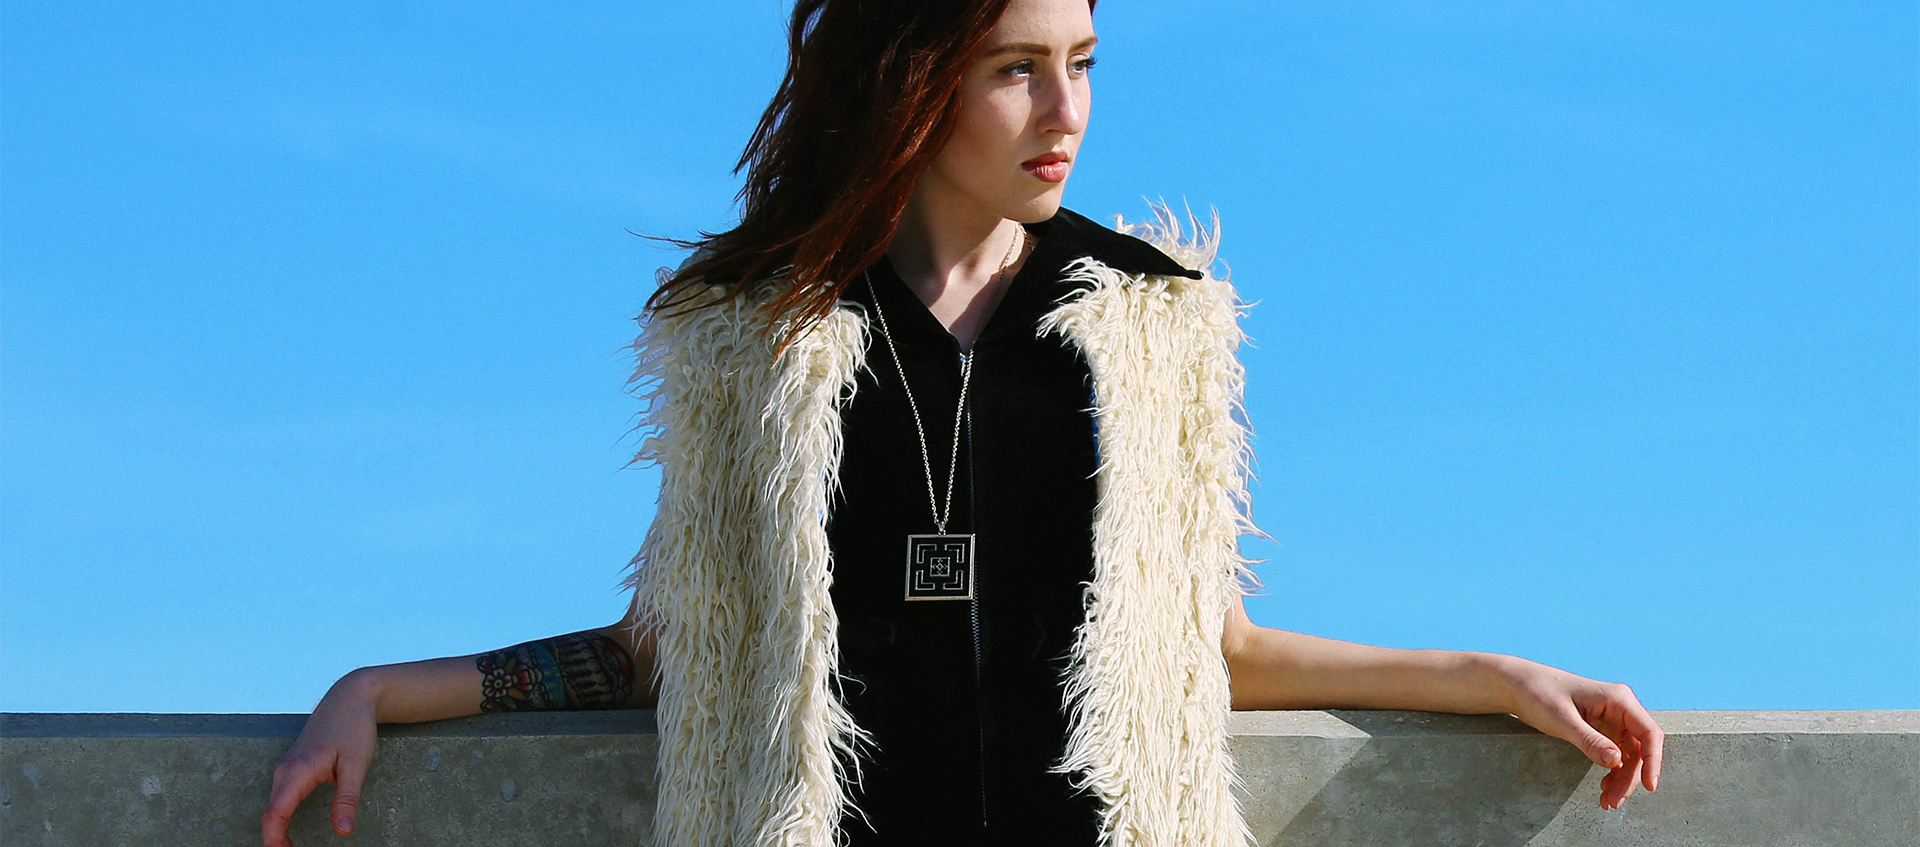 a woman in black and fur vest leaning on concrete ledge against blue sky